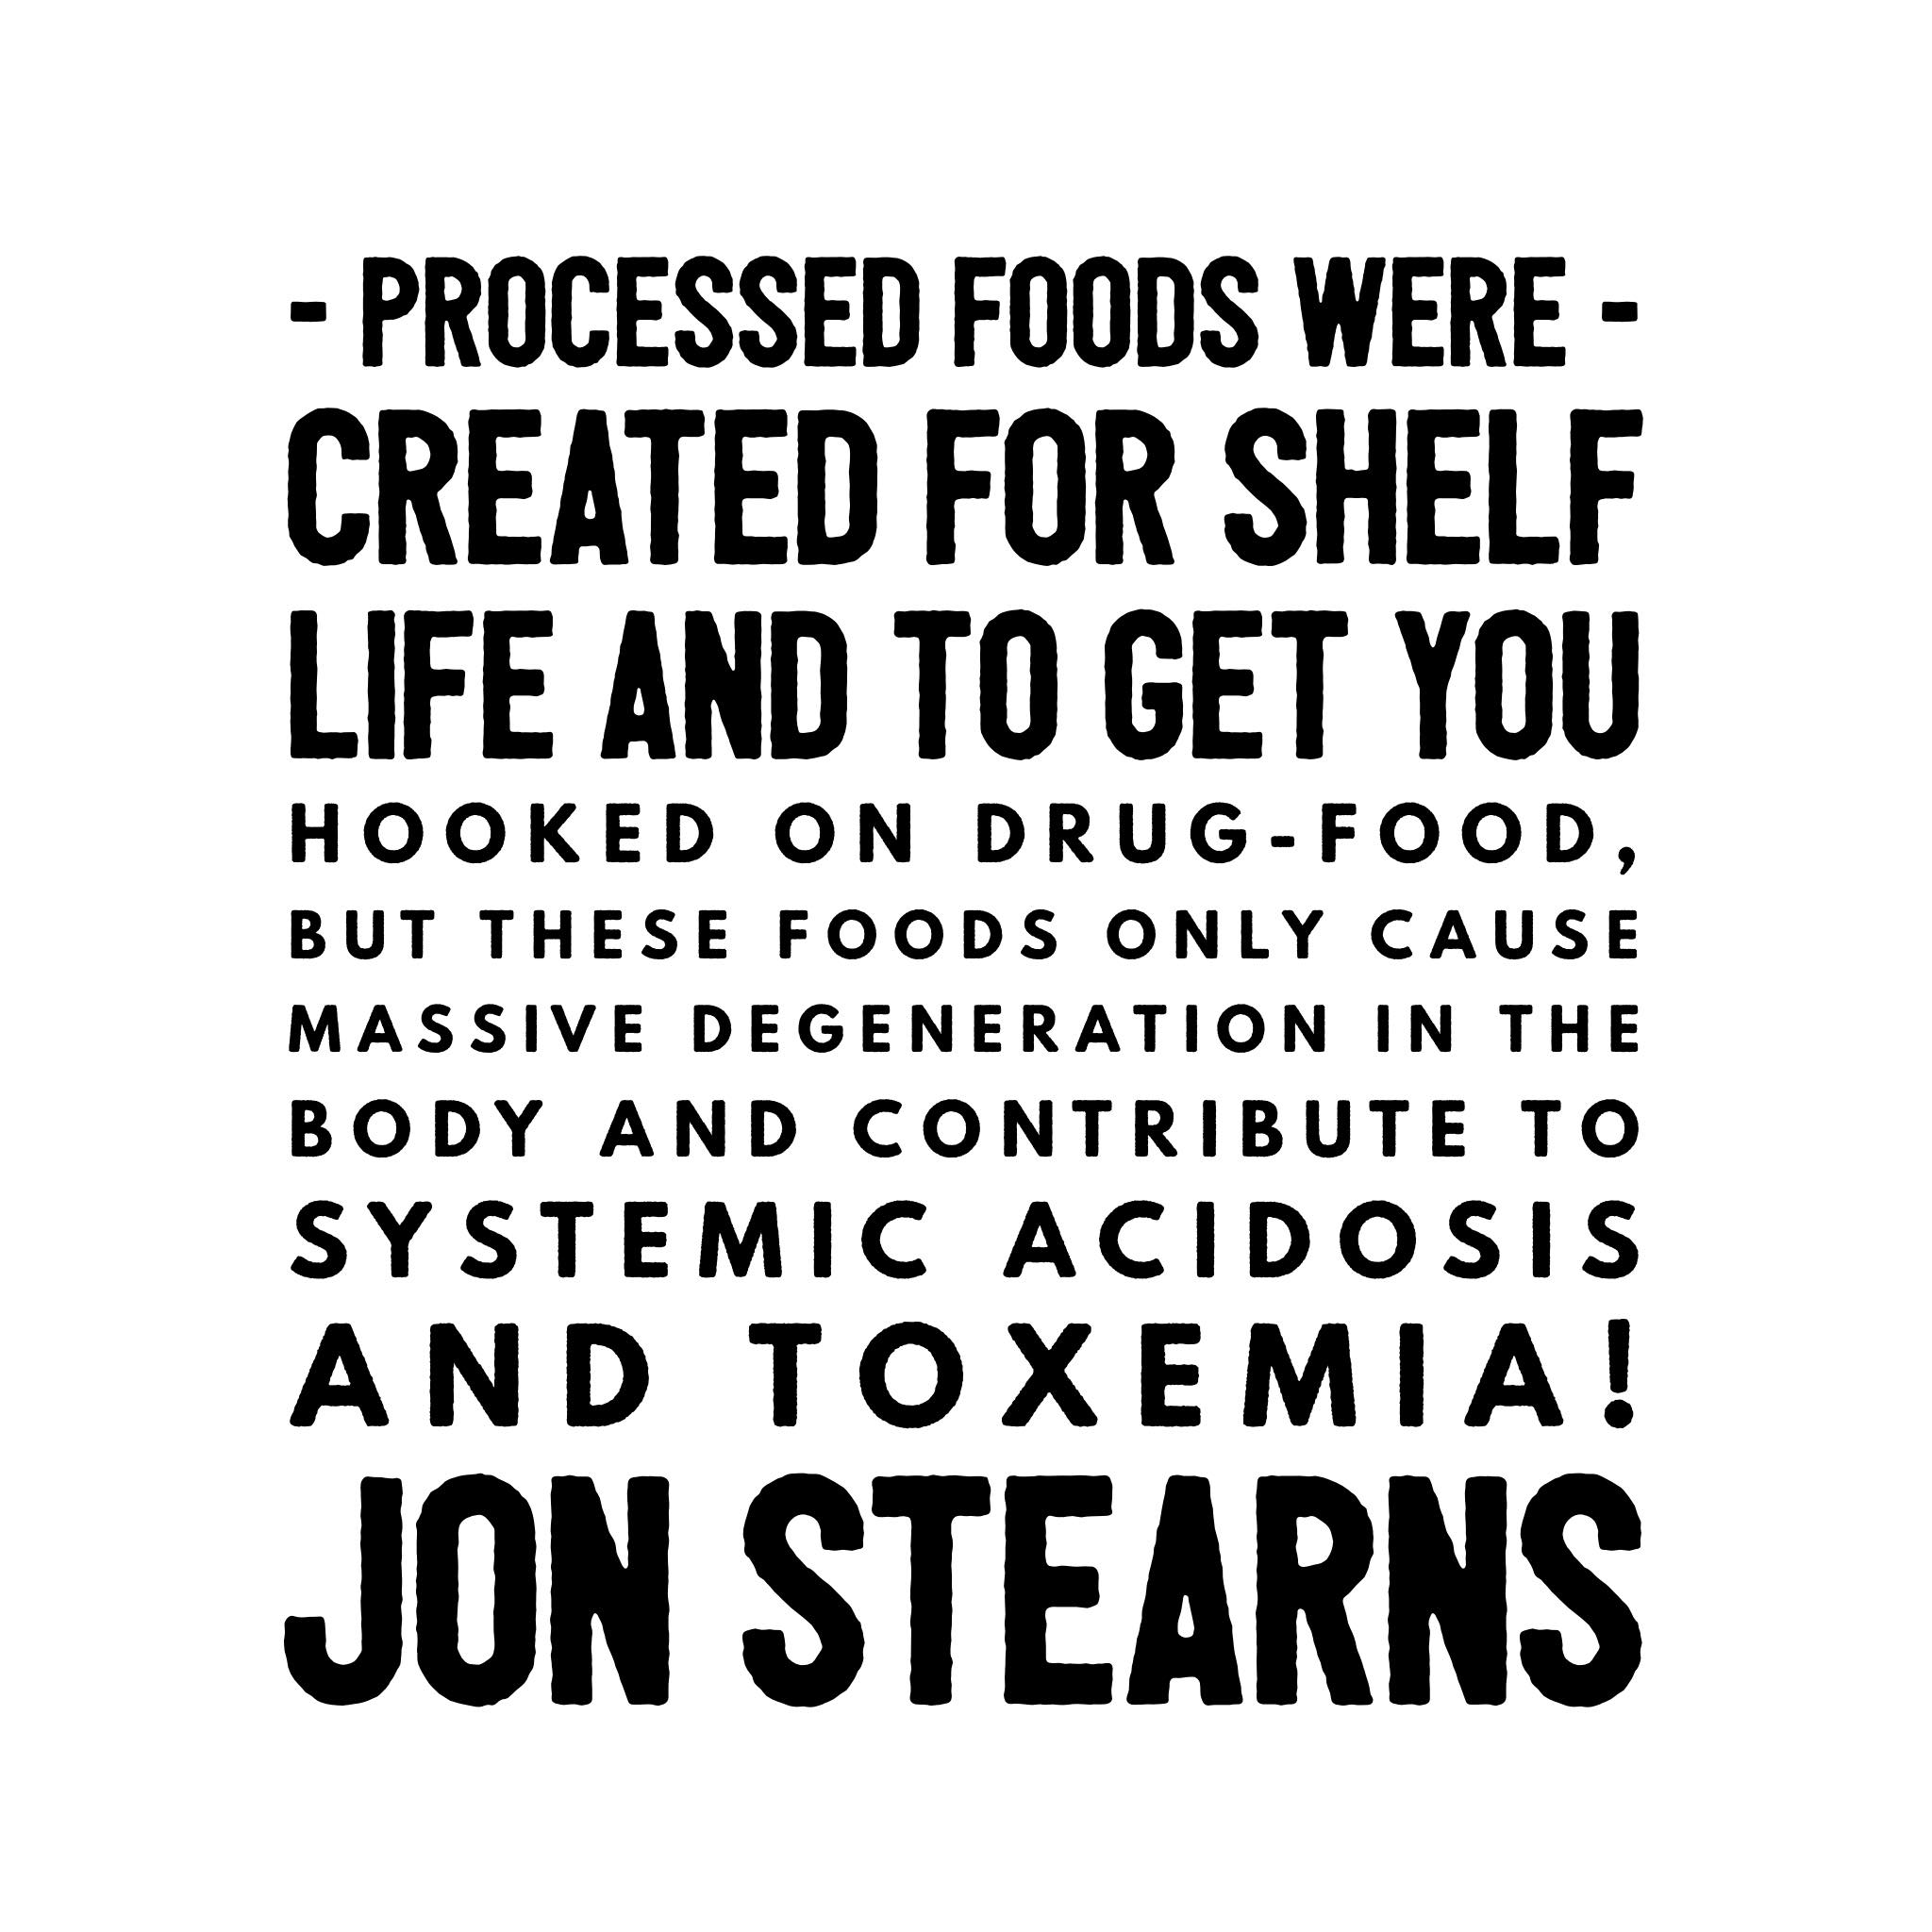 Processed foods are the first thing to stop eating on the road to getting healthy